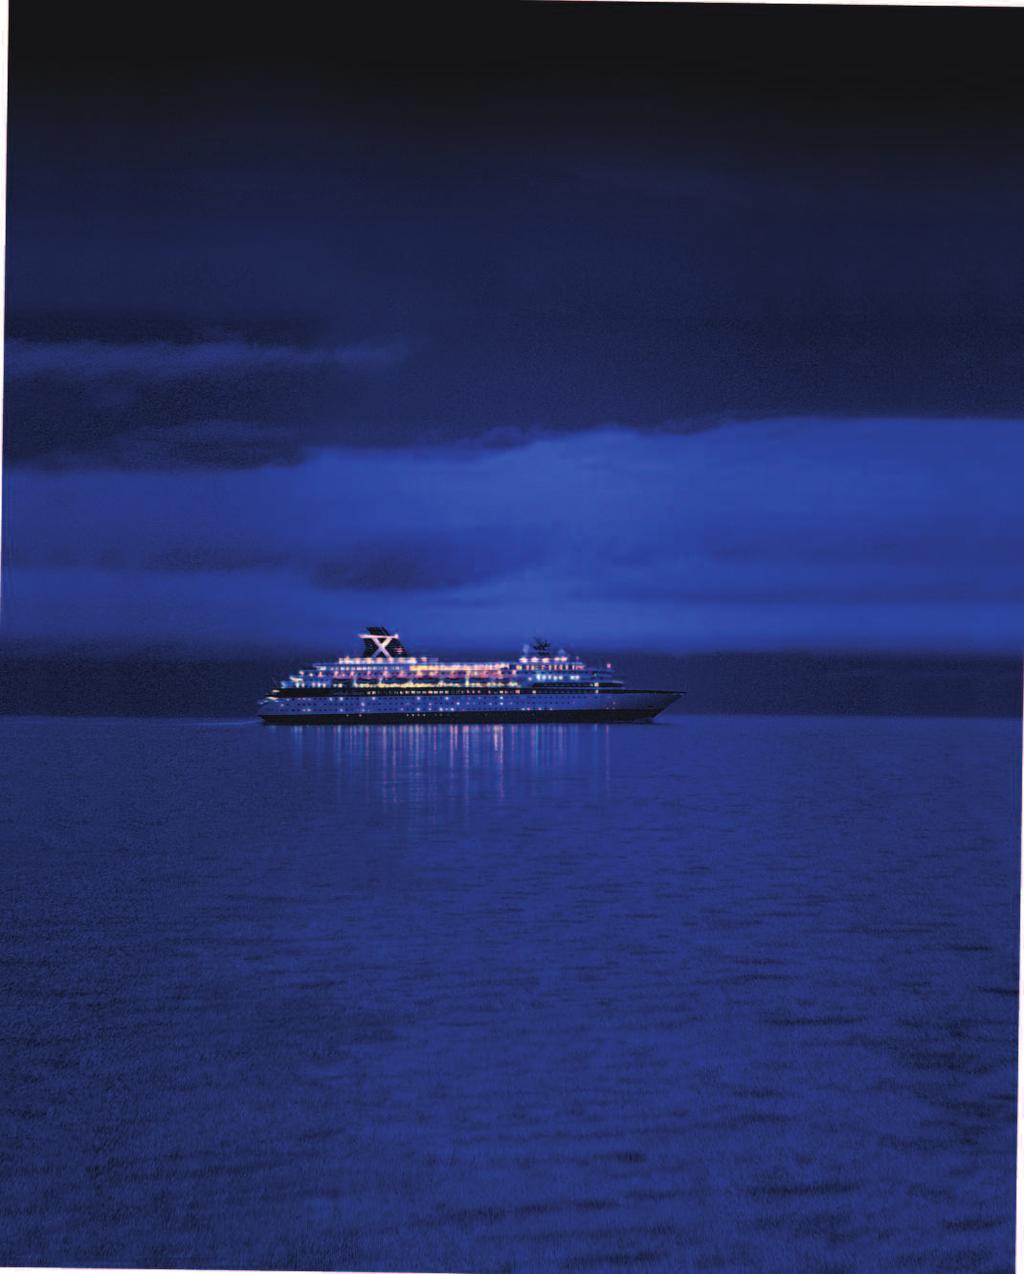 Cruise planner January 2007 - March 2008 The cruise planner highlights all the cruises referenced in this brochure.